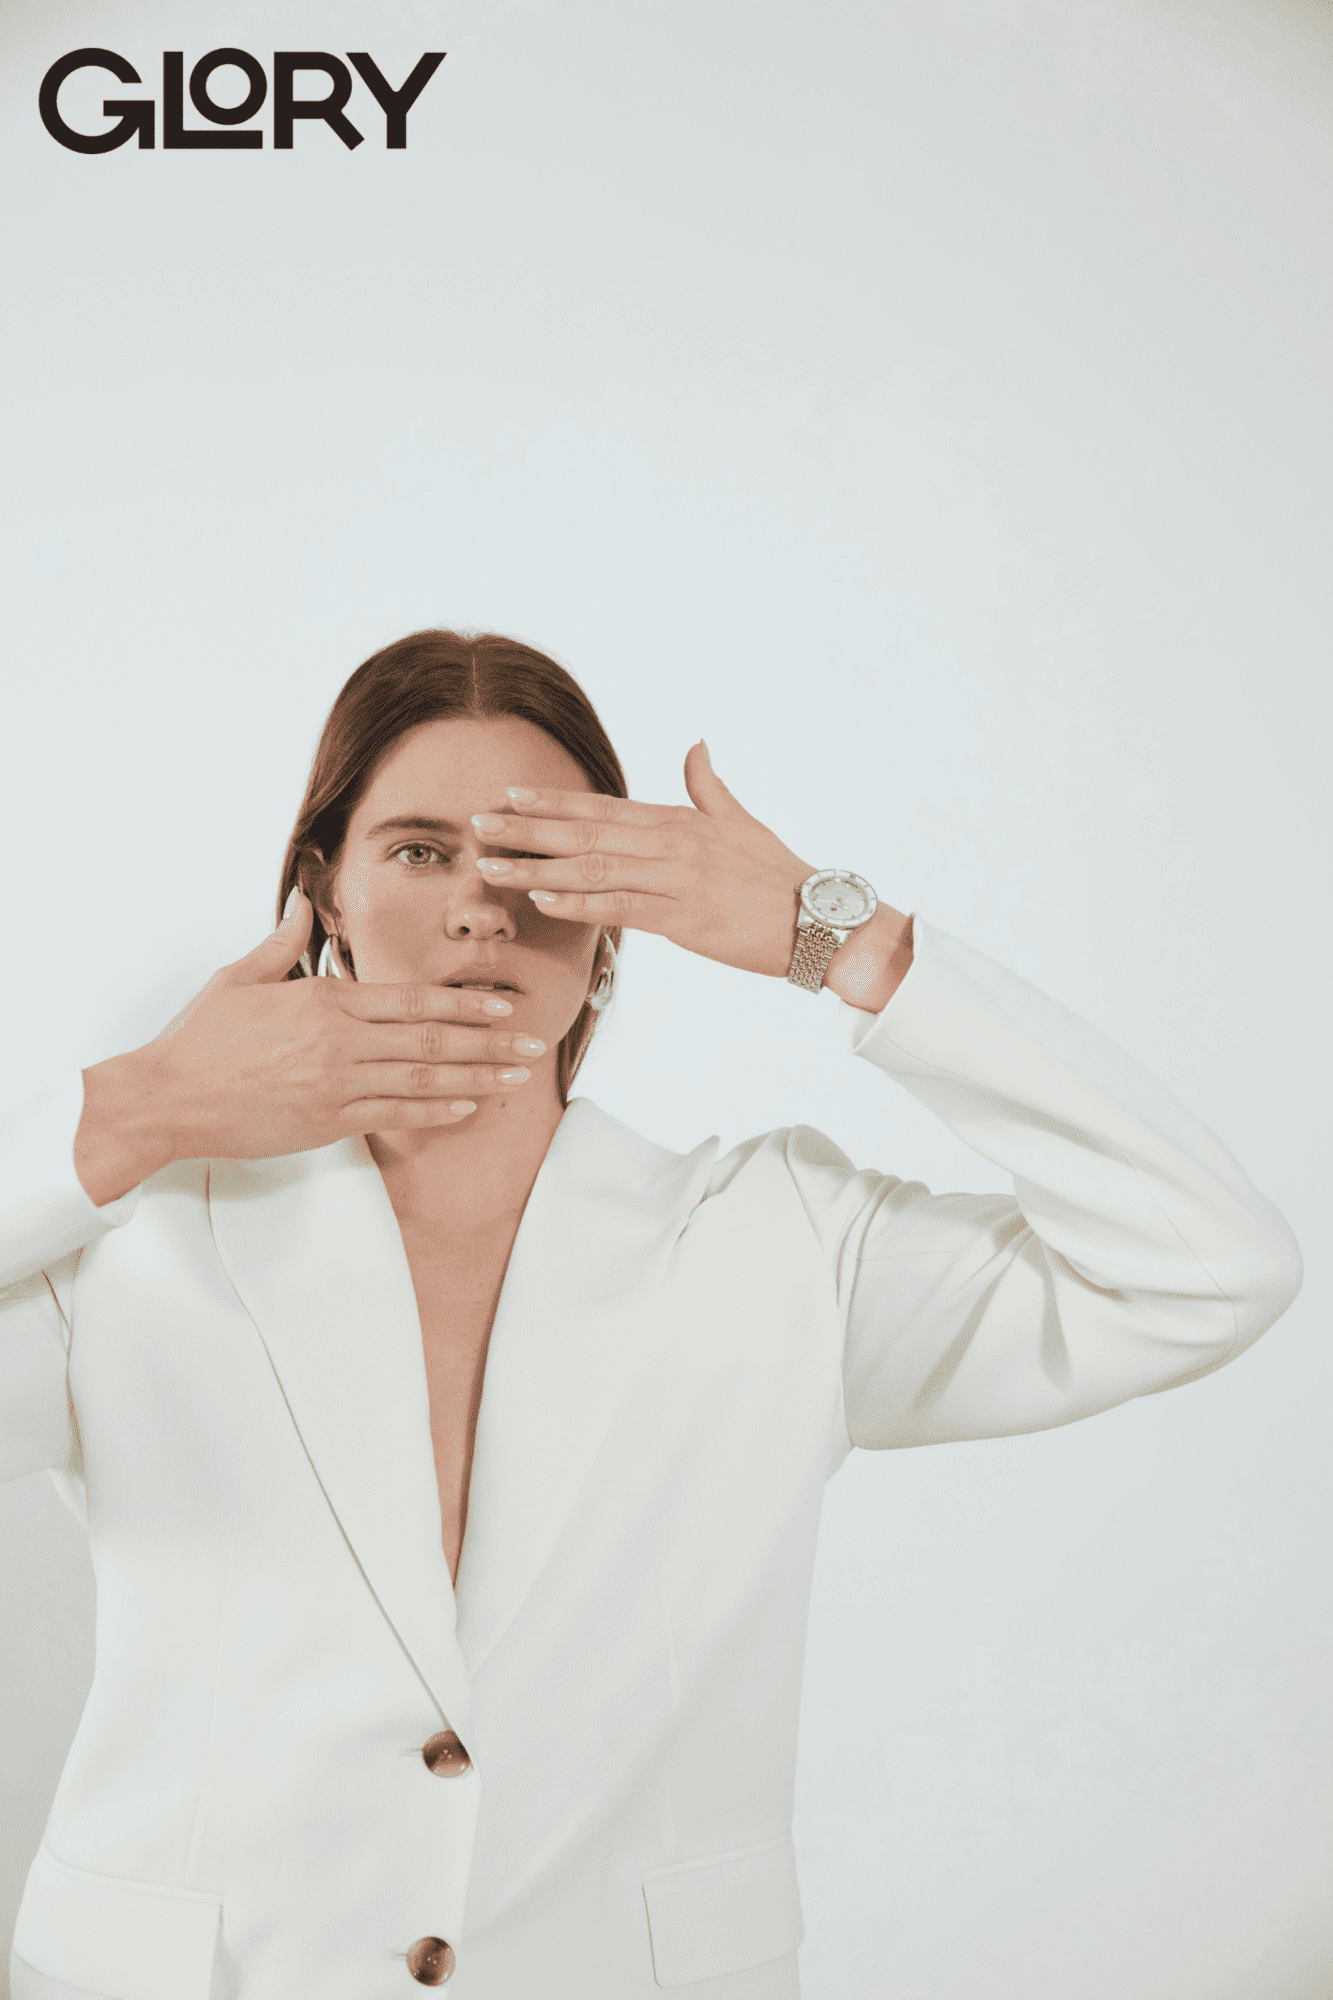 Alysha Newman wearing a white blazer. Her arms are raised. One is covering her left eye and the other is covering her mouth. She is wearing a Rado watch.